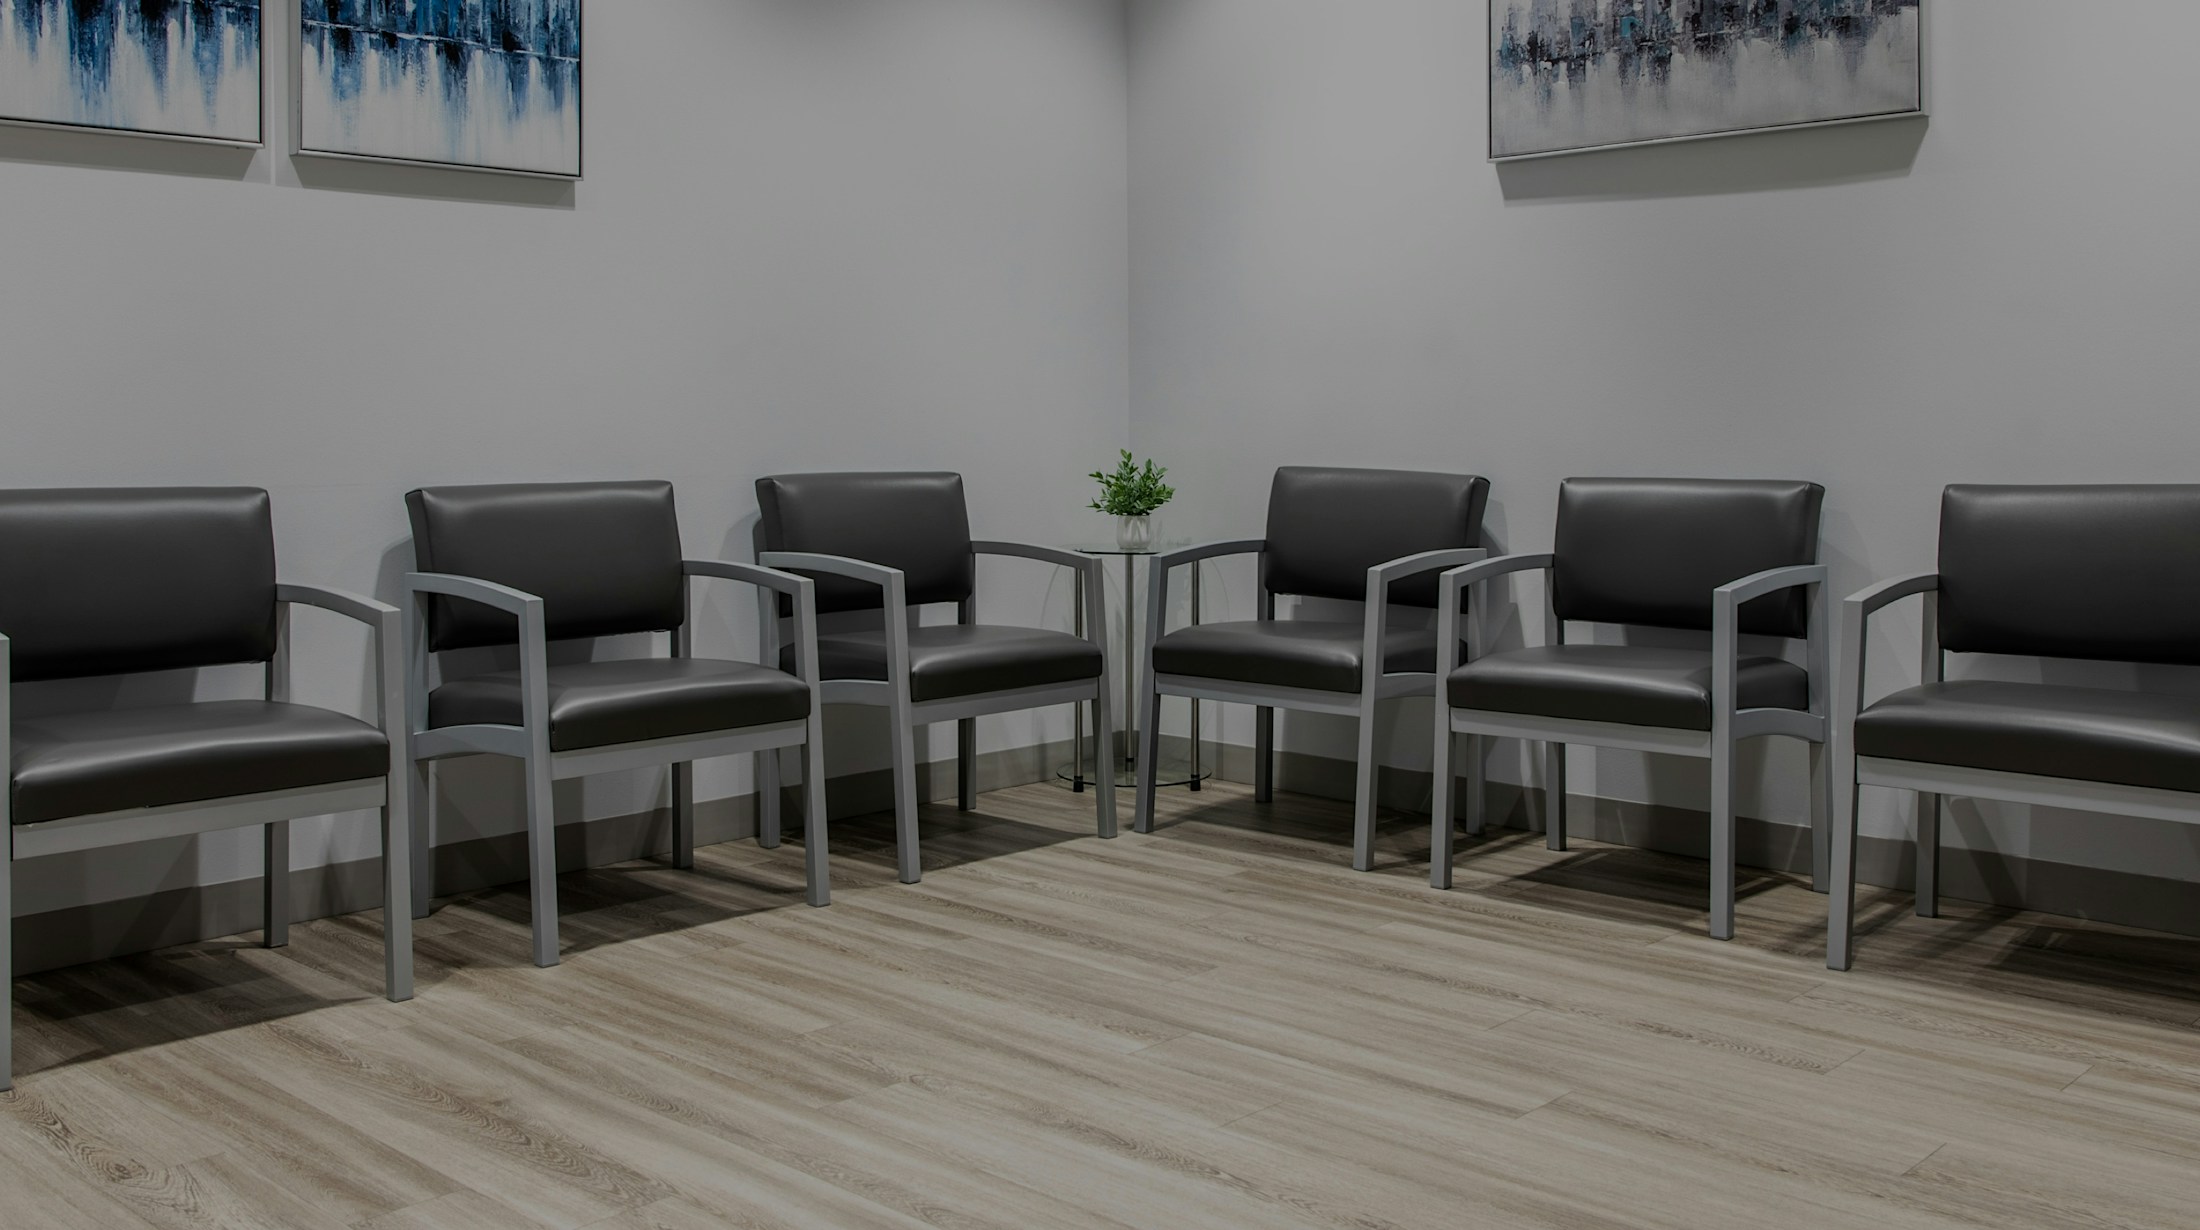 Waiting room for patients at Wound Evolution